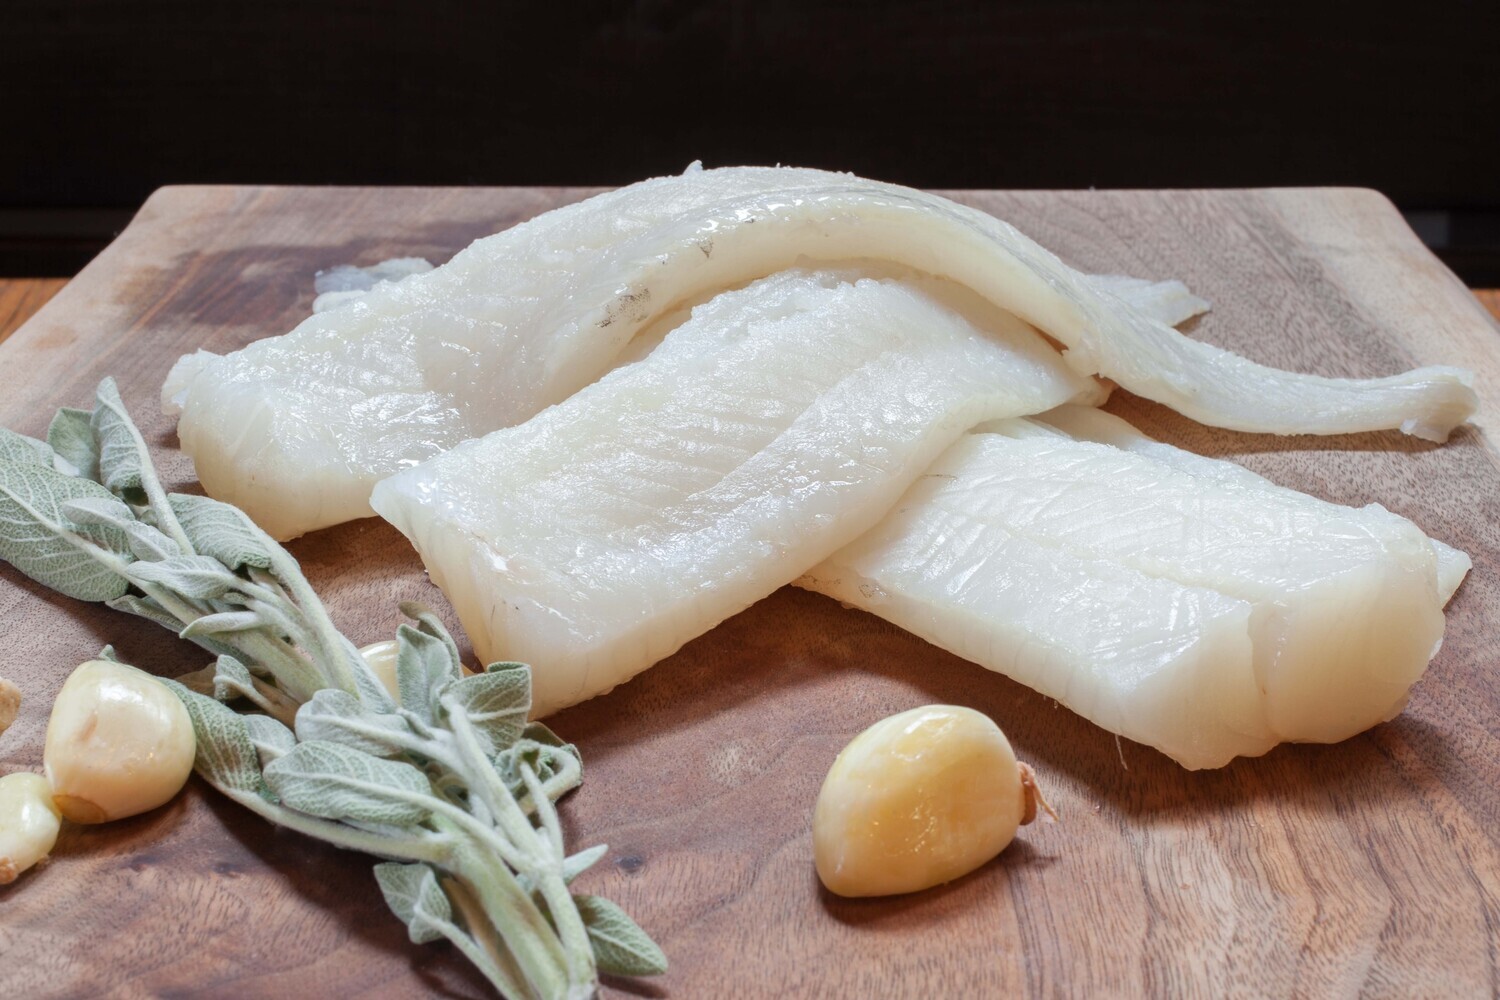 Wild Cod (priced per pound), Pack Size: 1 lb packs